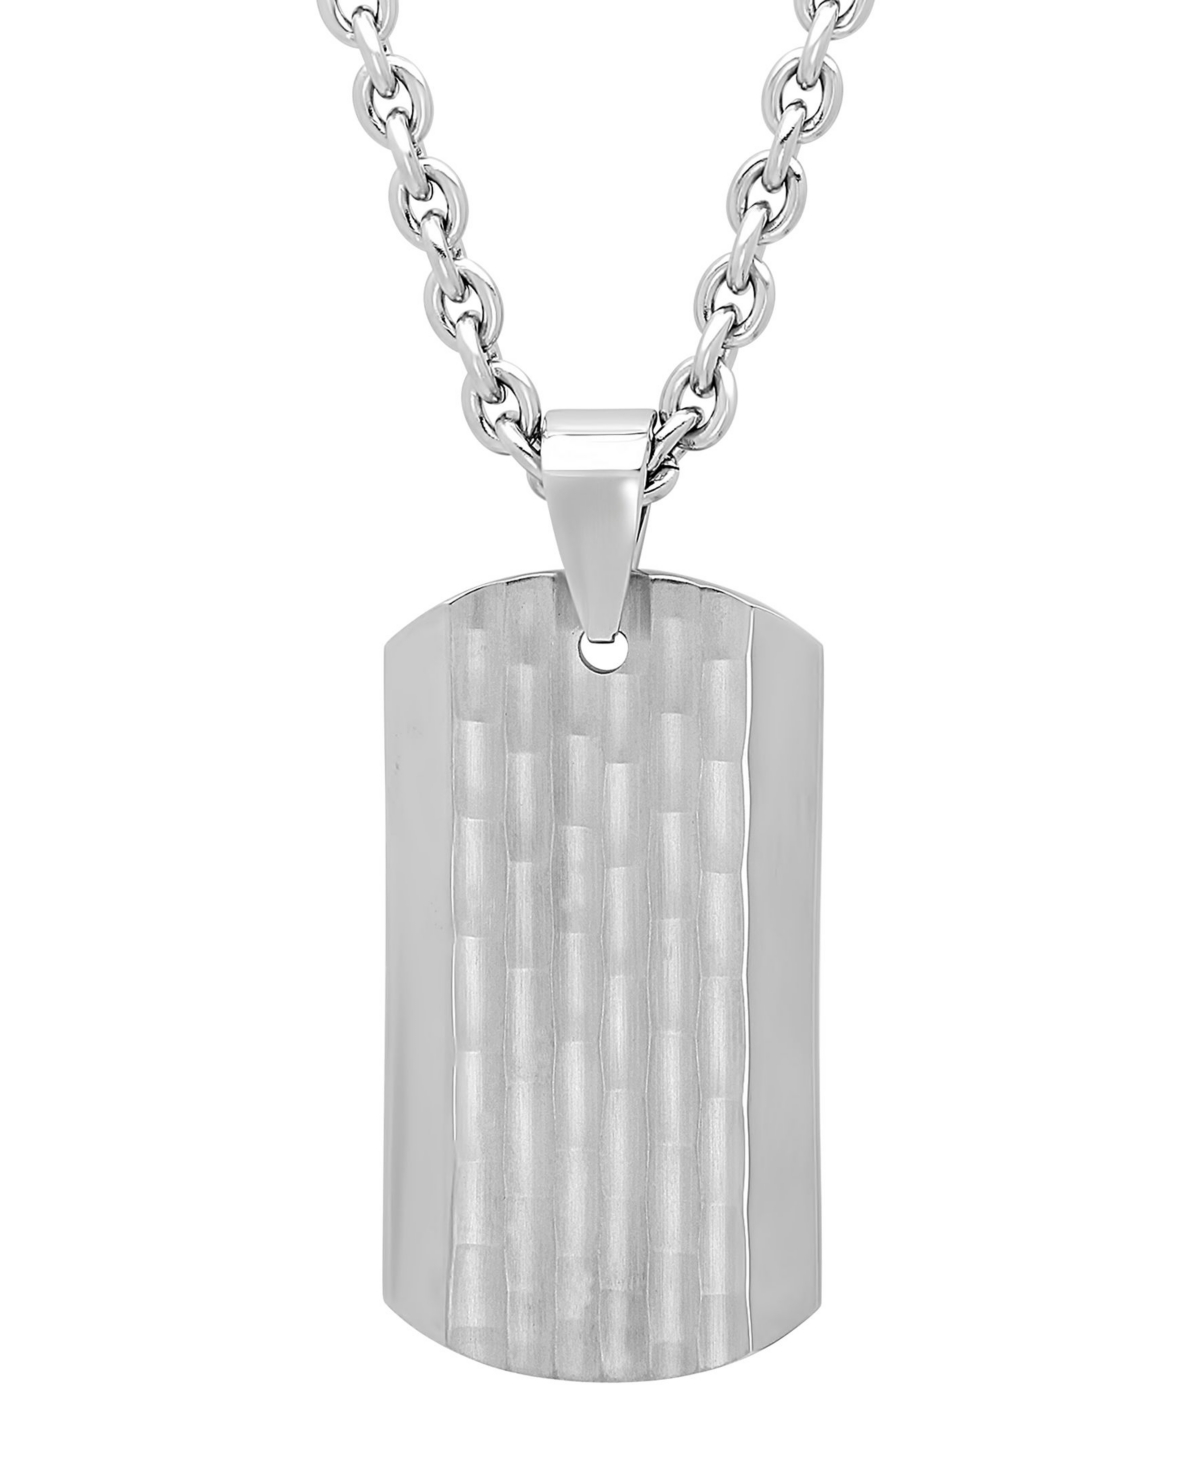 C & c Jewelry Men's Hammered Dog Tag in Stainless Steel Pendant Necklace